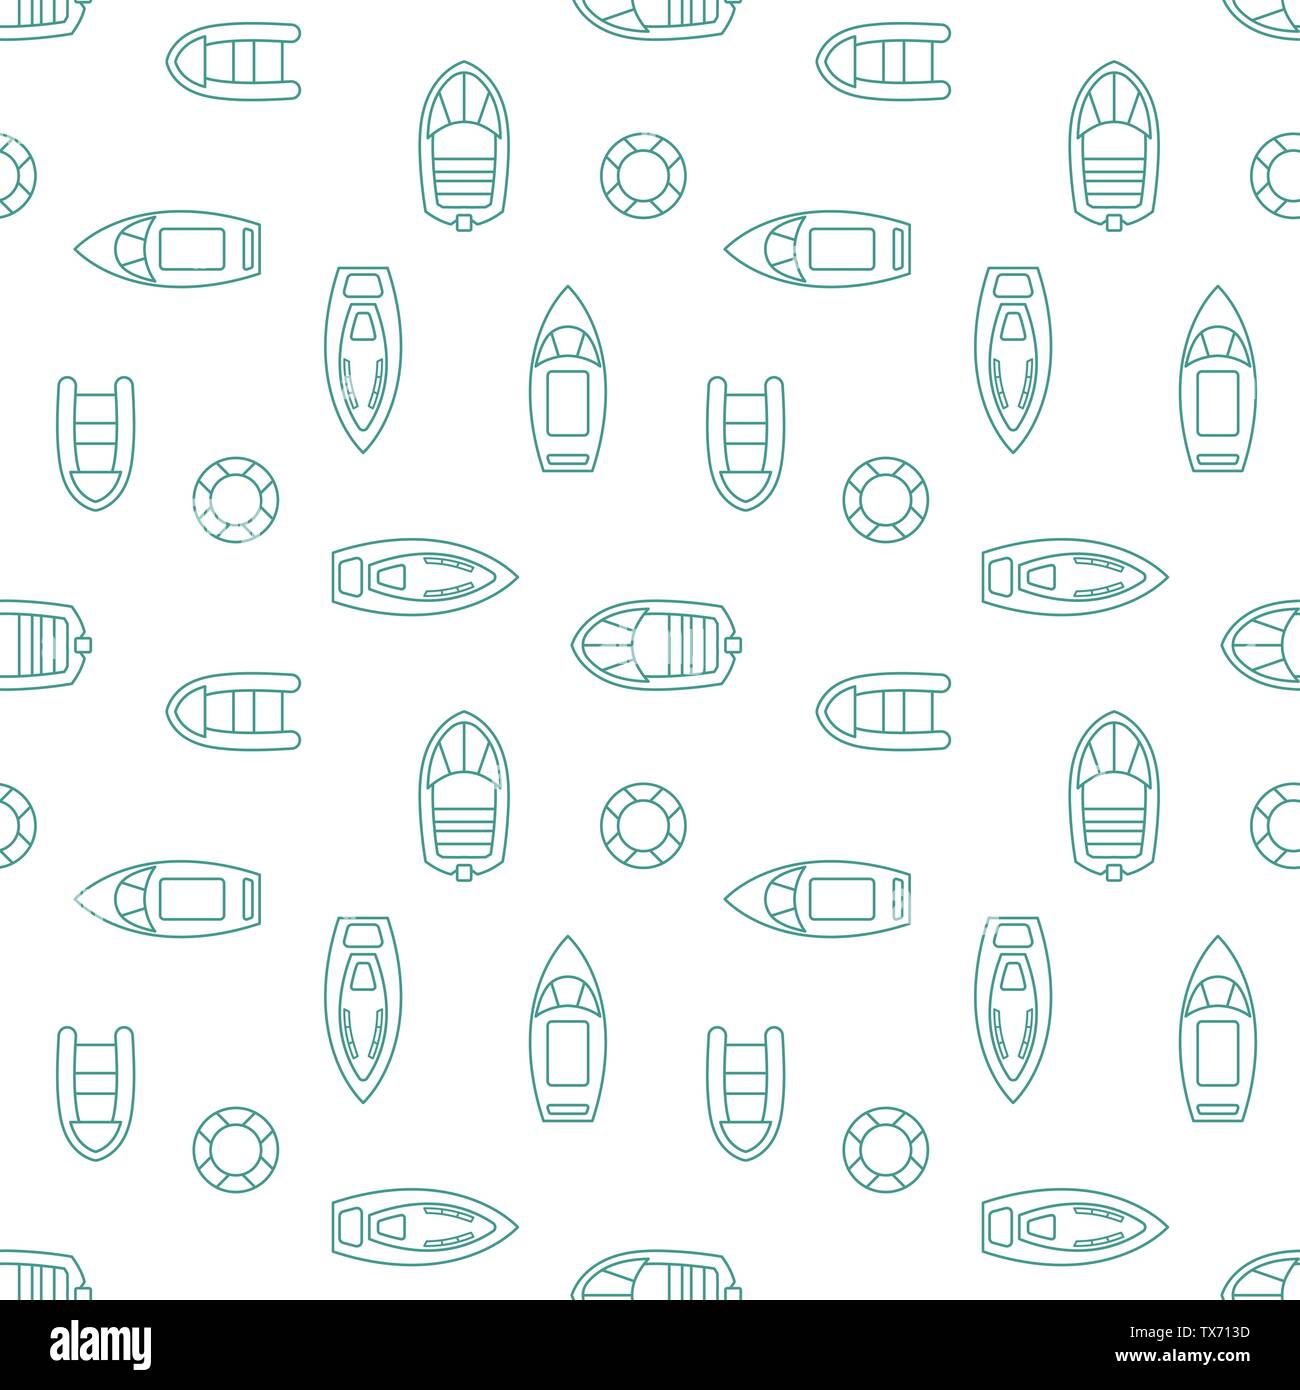 Boats silhouettes seamless pattern Stock Vector